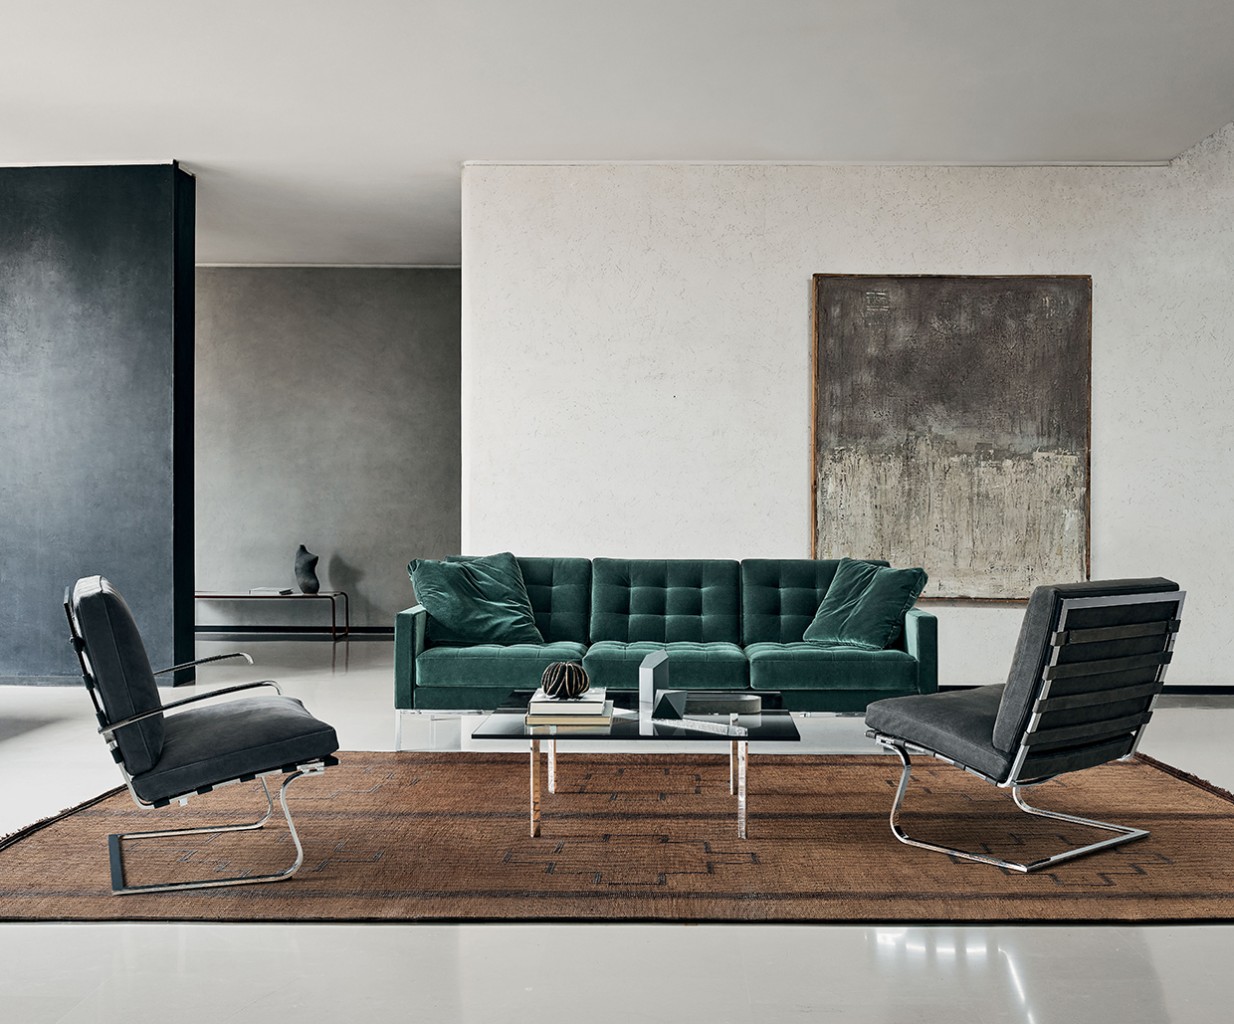 Knoll_Tugendhat-Chair_Mies-van-der-Rohe_Ph-Federico-Cedrone_26